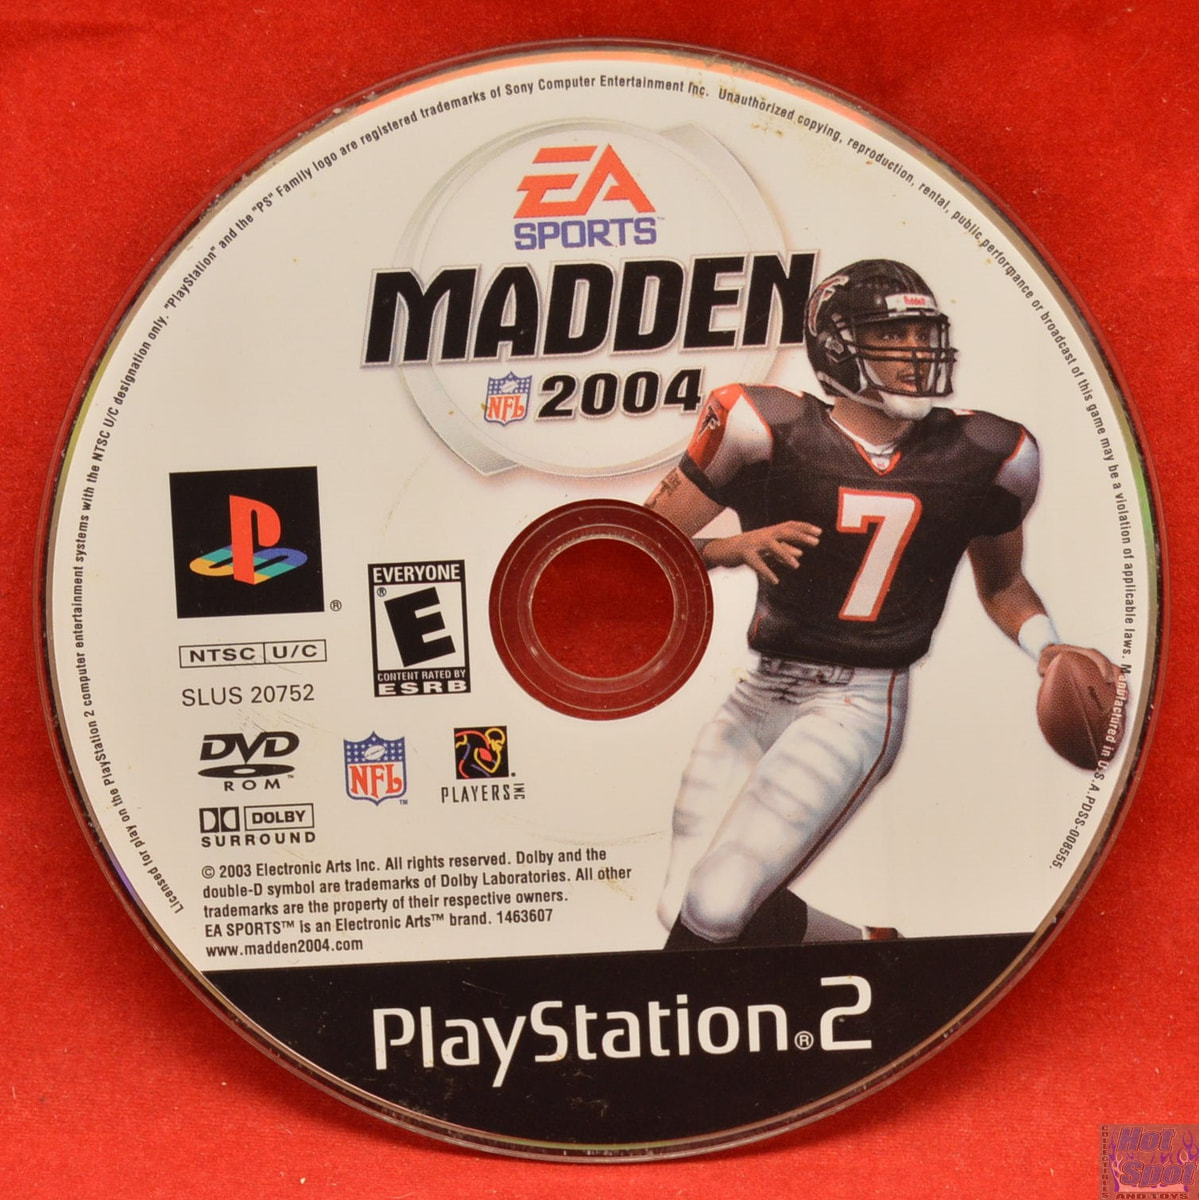 Hot Spot Collectibles and Toys - Madden 2004 Game DISC ONLY PS2